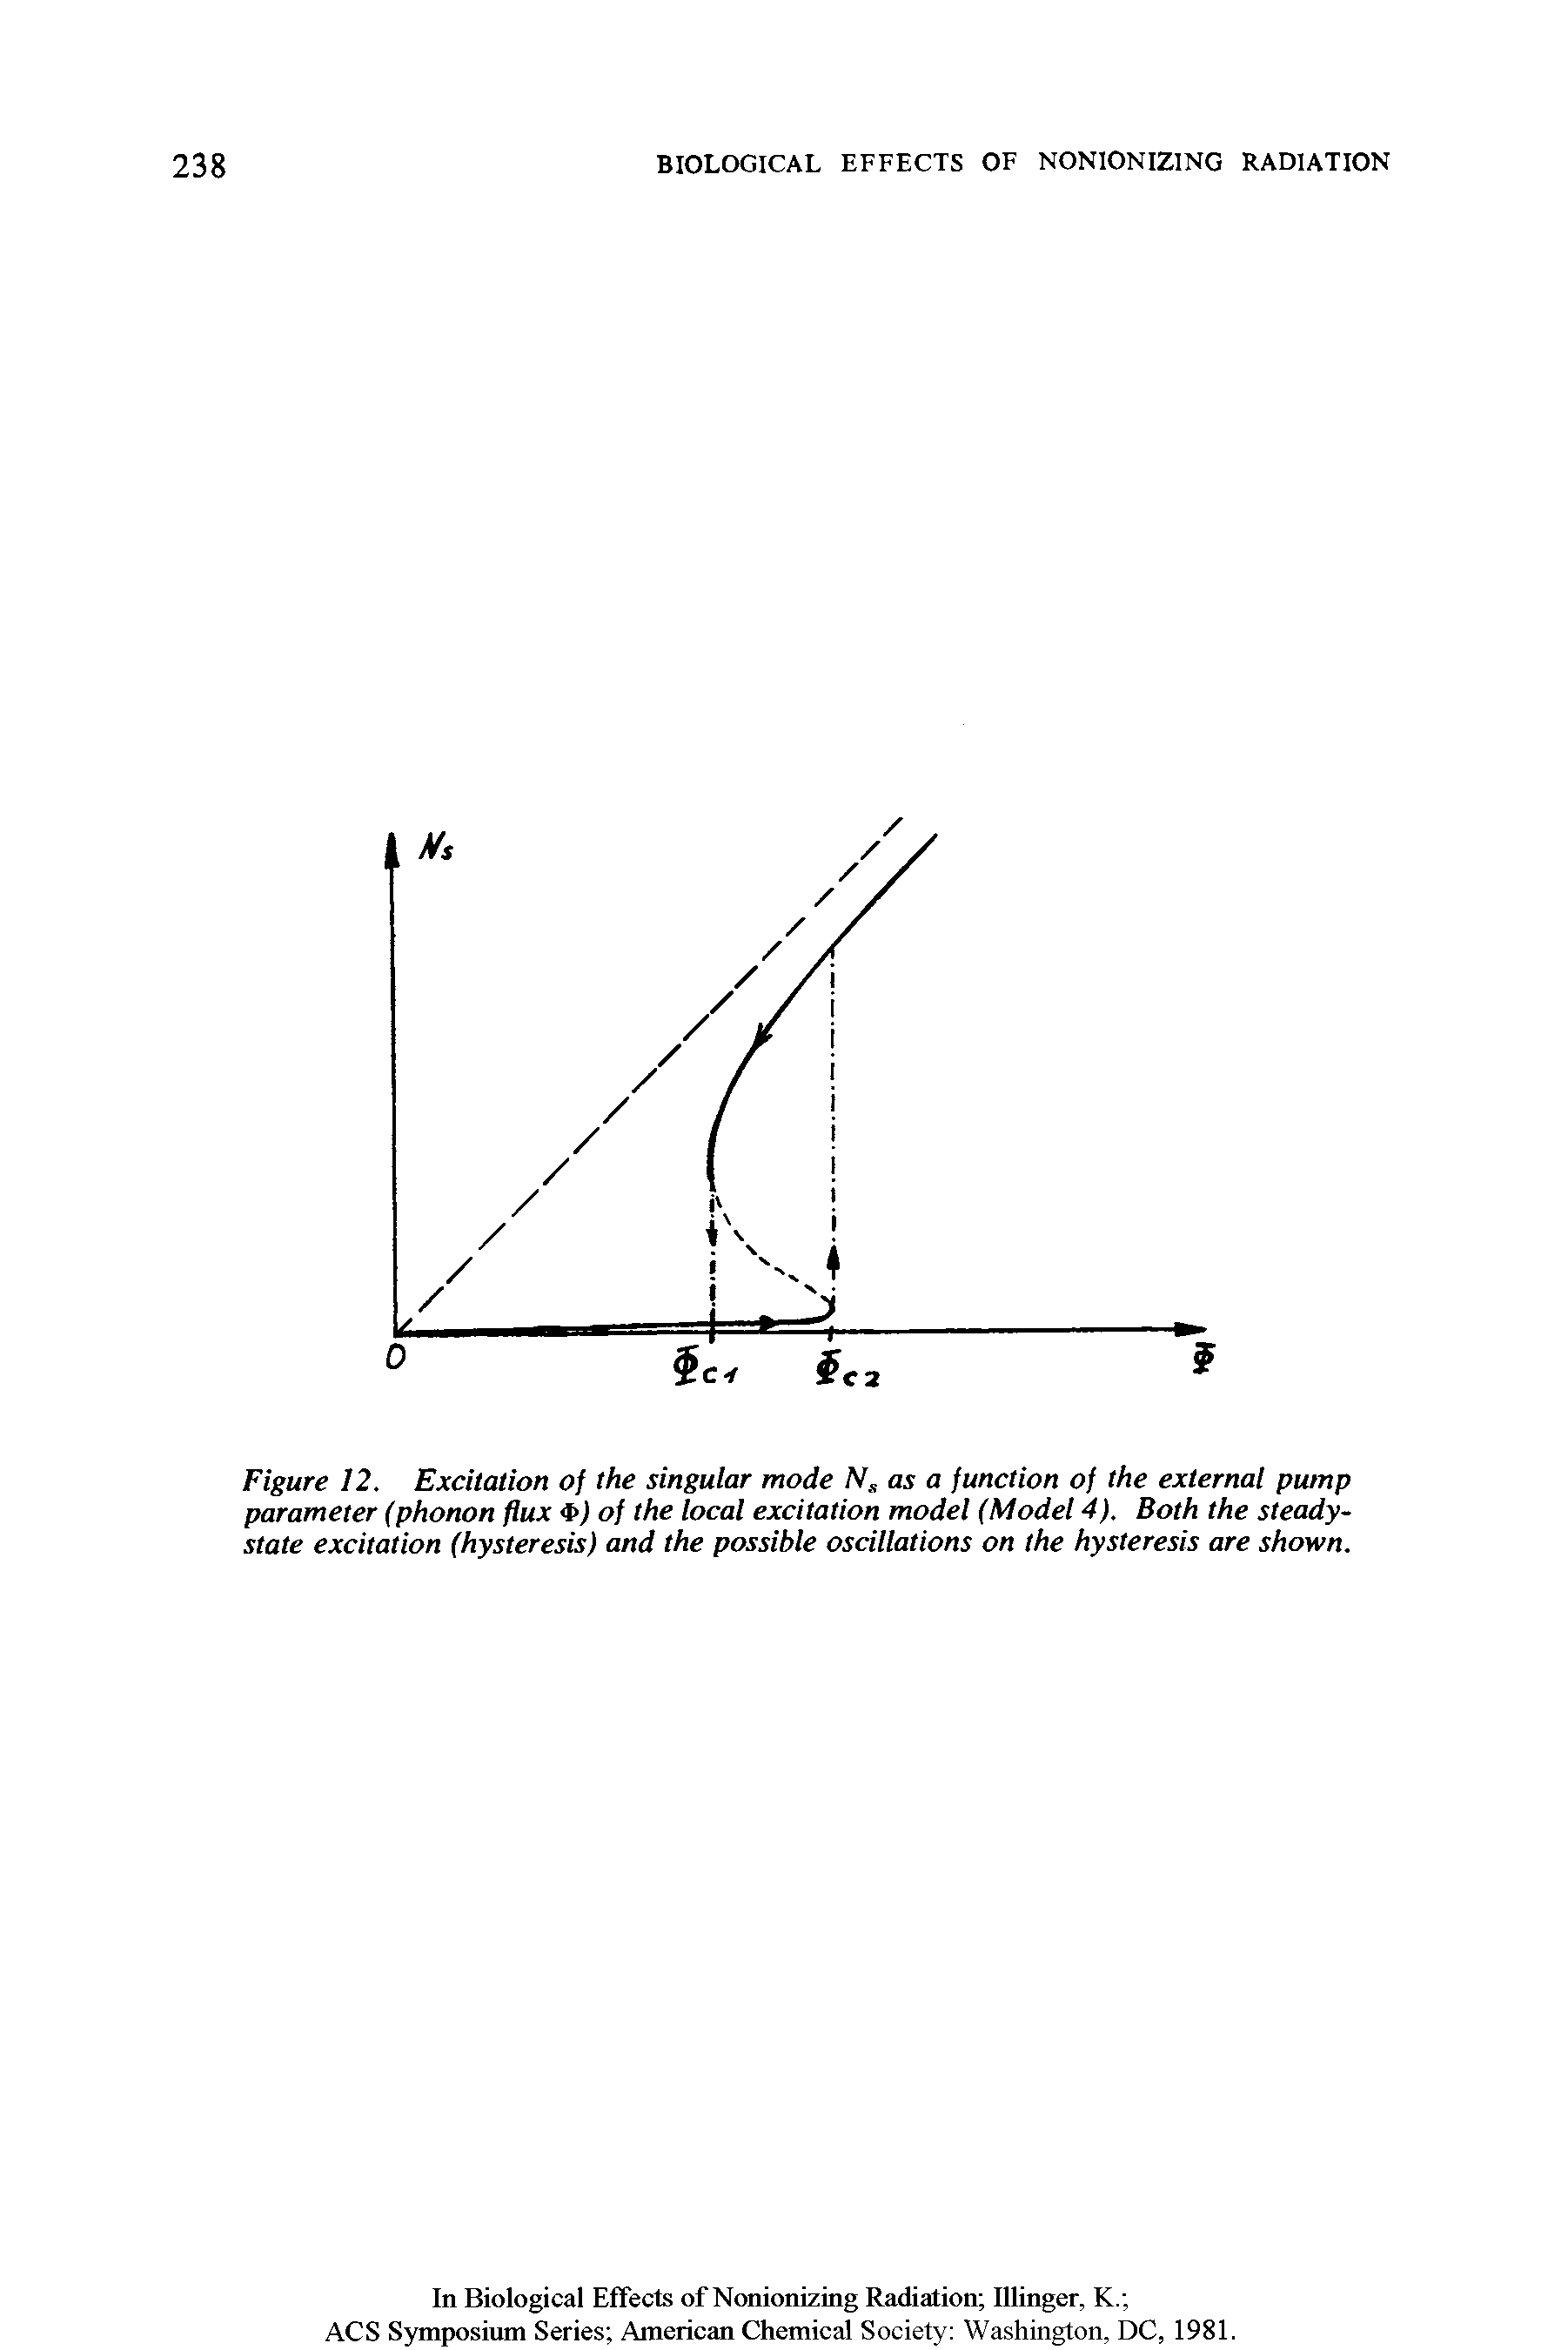 Figure 12. Excitation of the singular mode Ns as a function of the external pump parameter (phonon flux <FJ of the local excitation model (Model 4). Both the steady-state excitation (hysteresis) and the possible oscillations on the hysteresis are shown.